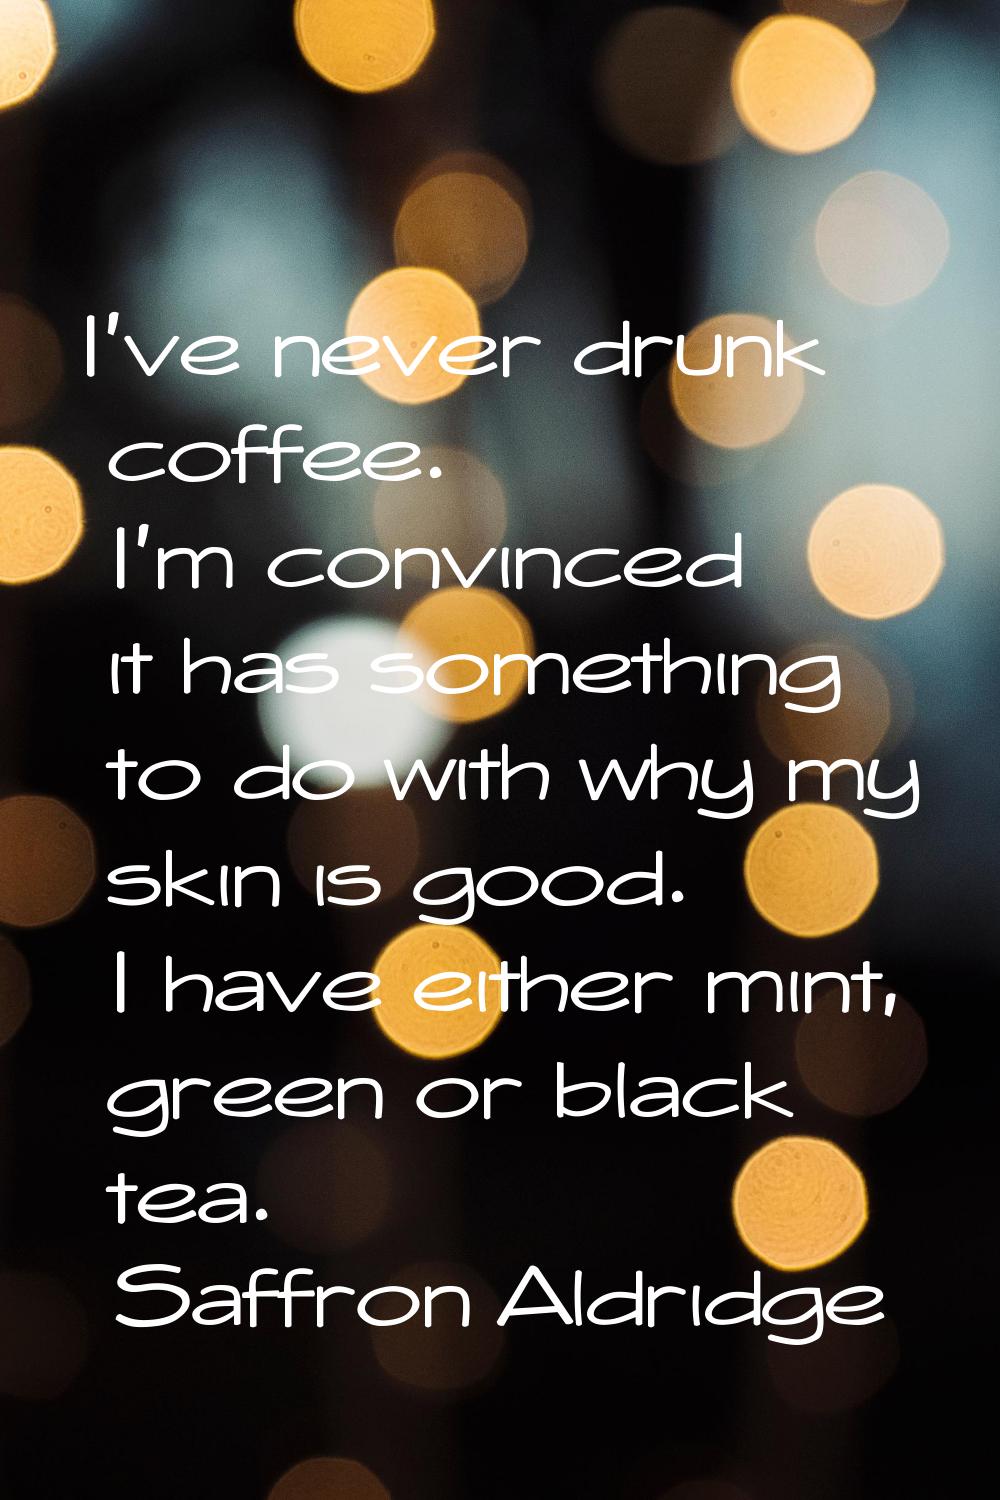 I've never drunk coffee. I'm convinced it has something to do with why my skin is good. I have eith